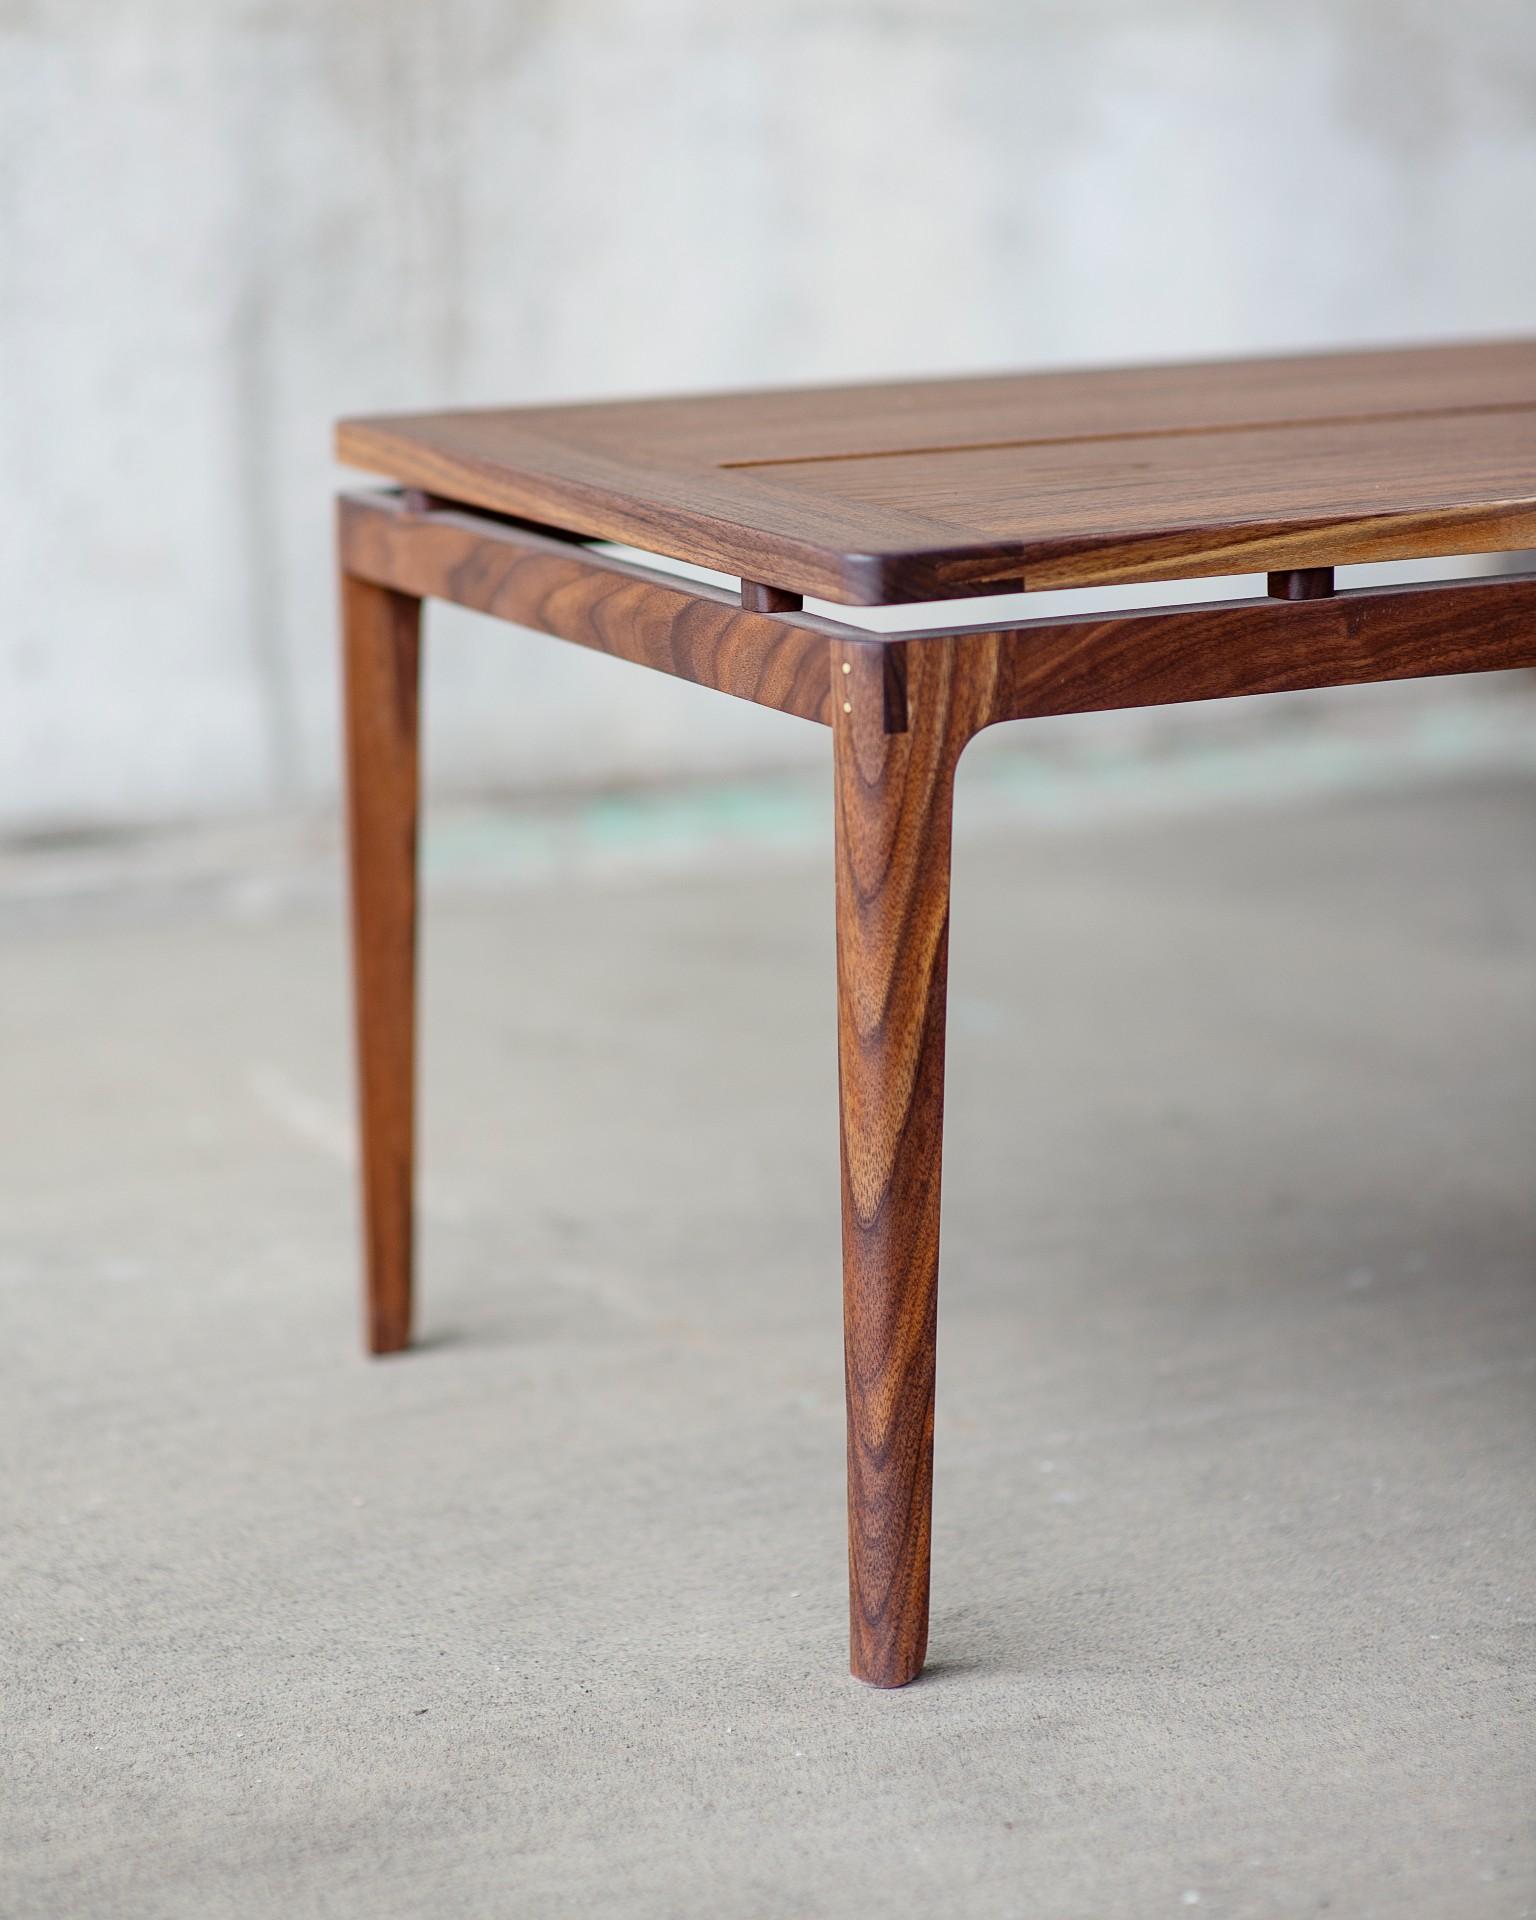 The Halley is our most diverse and striking table. At a standard height of 18 inches, the size is perfect for either a coffee or side table. The table comes in 3 solid wood top versions all with an option for live edge center. As an added level of